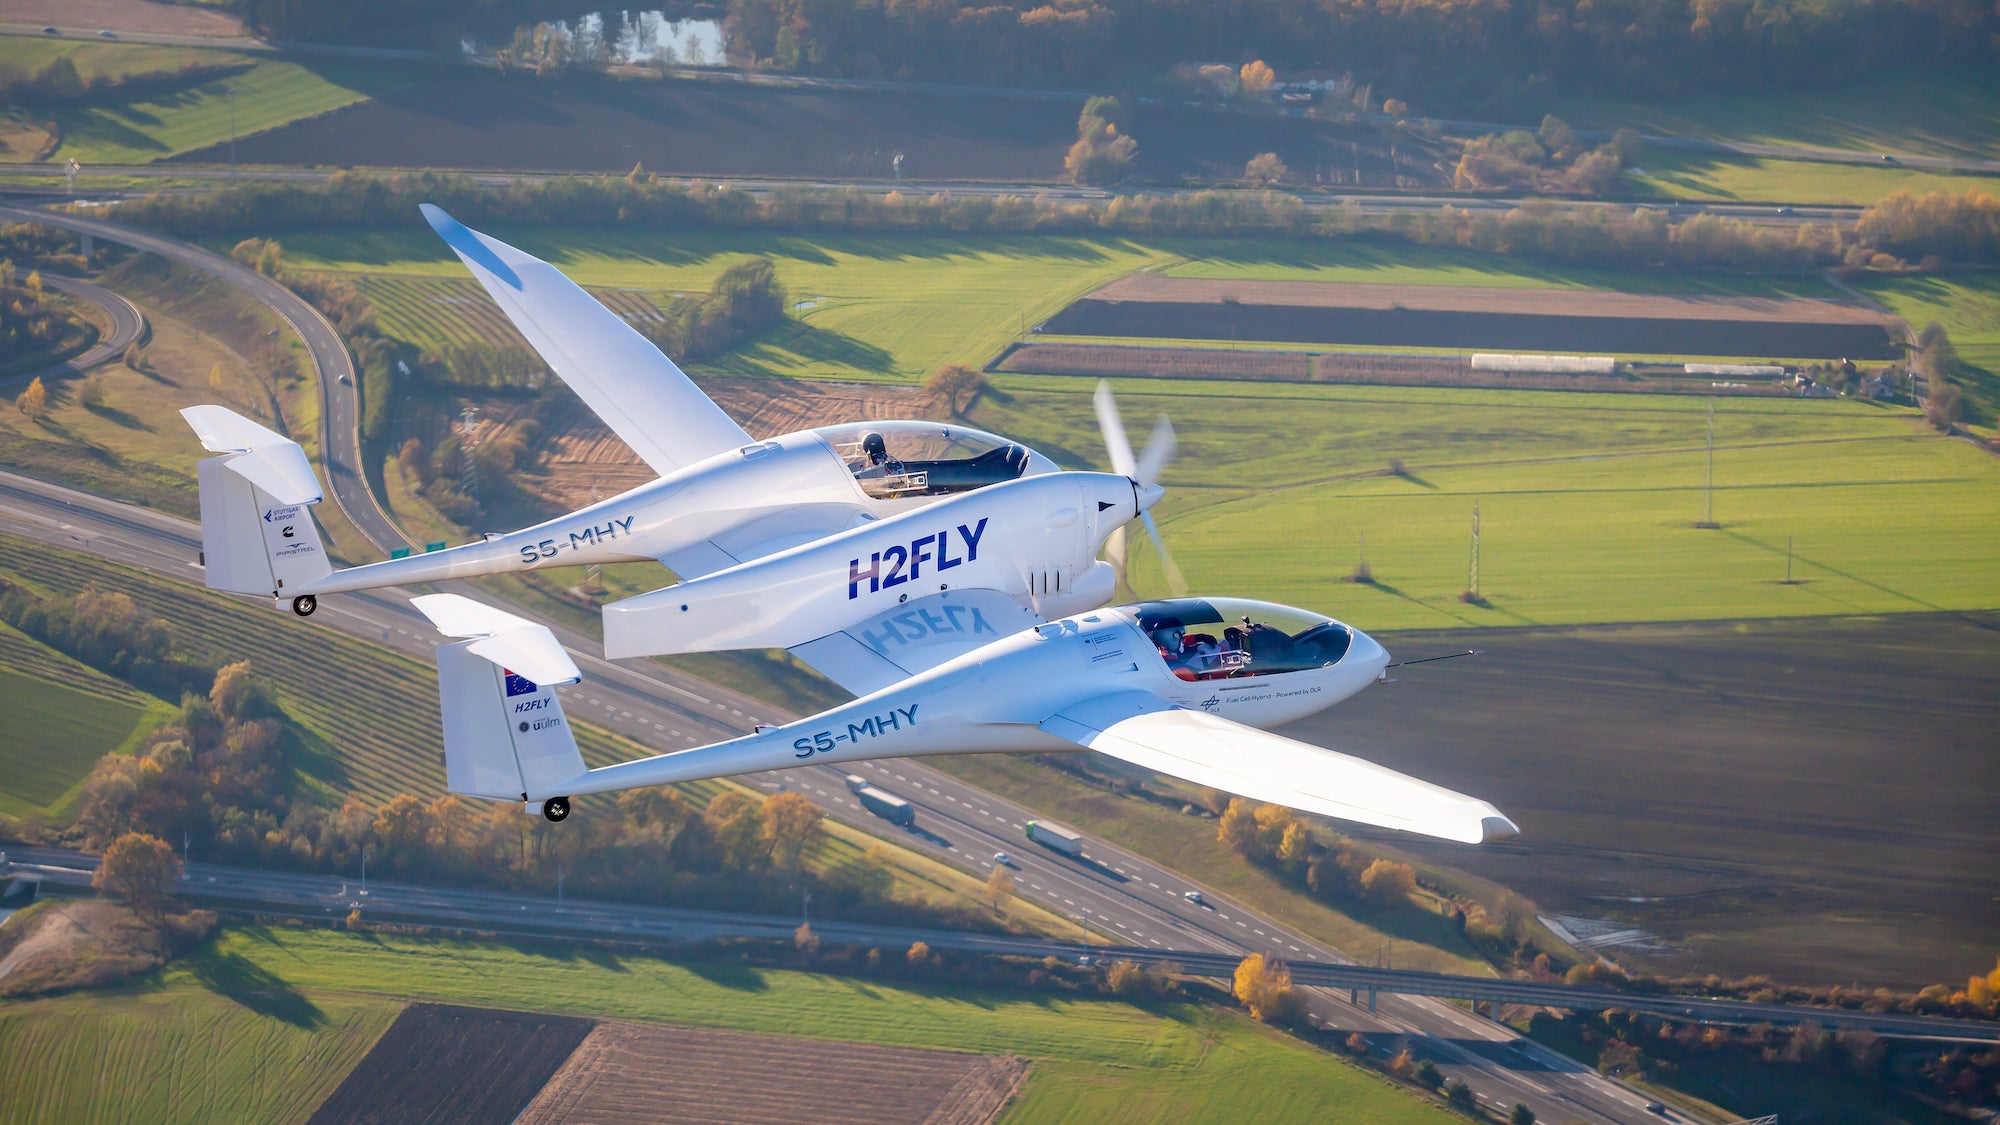  This liquid hydrogen-powered plane successfully completed its first test flights 